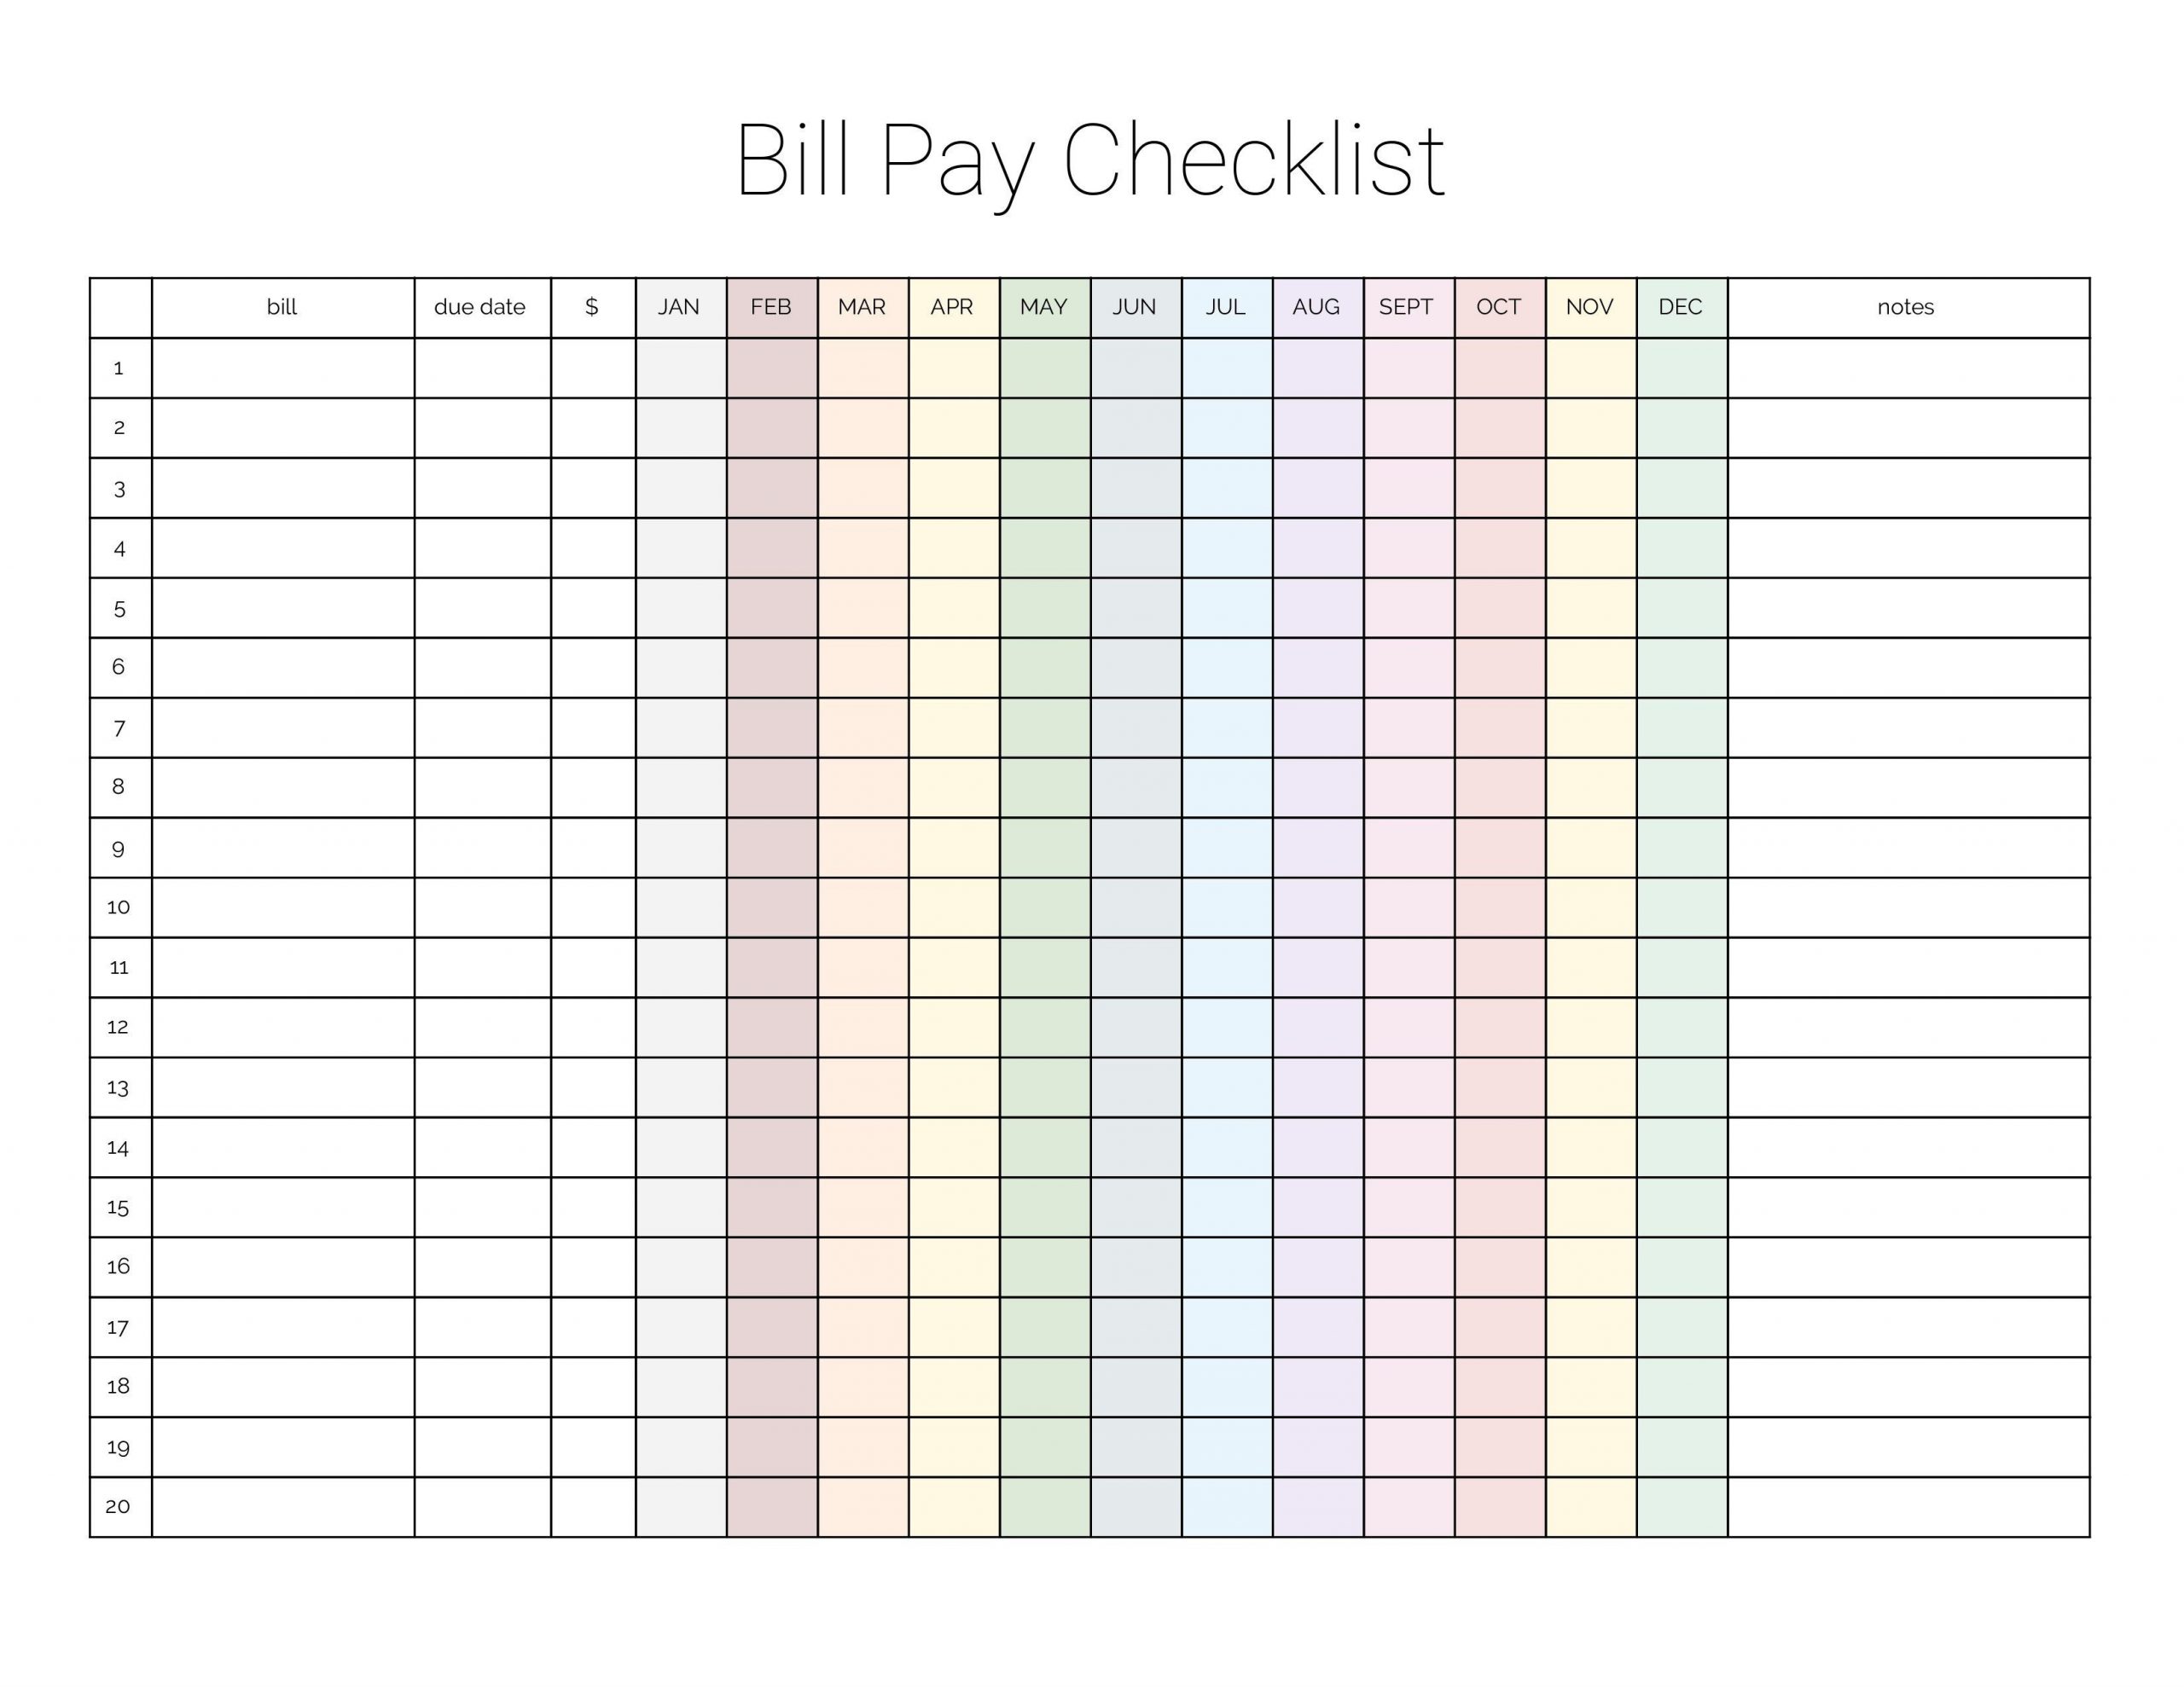 Monthly Bill Payment Checklist {Printable} - Million Ways To  Monthly Bill Checklist Excel